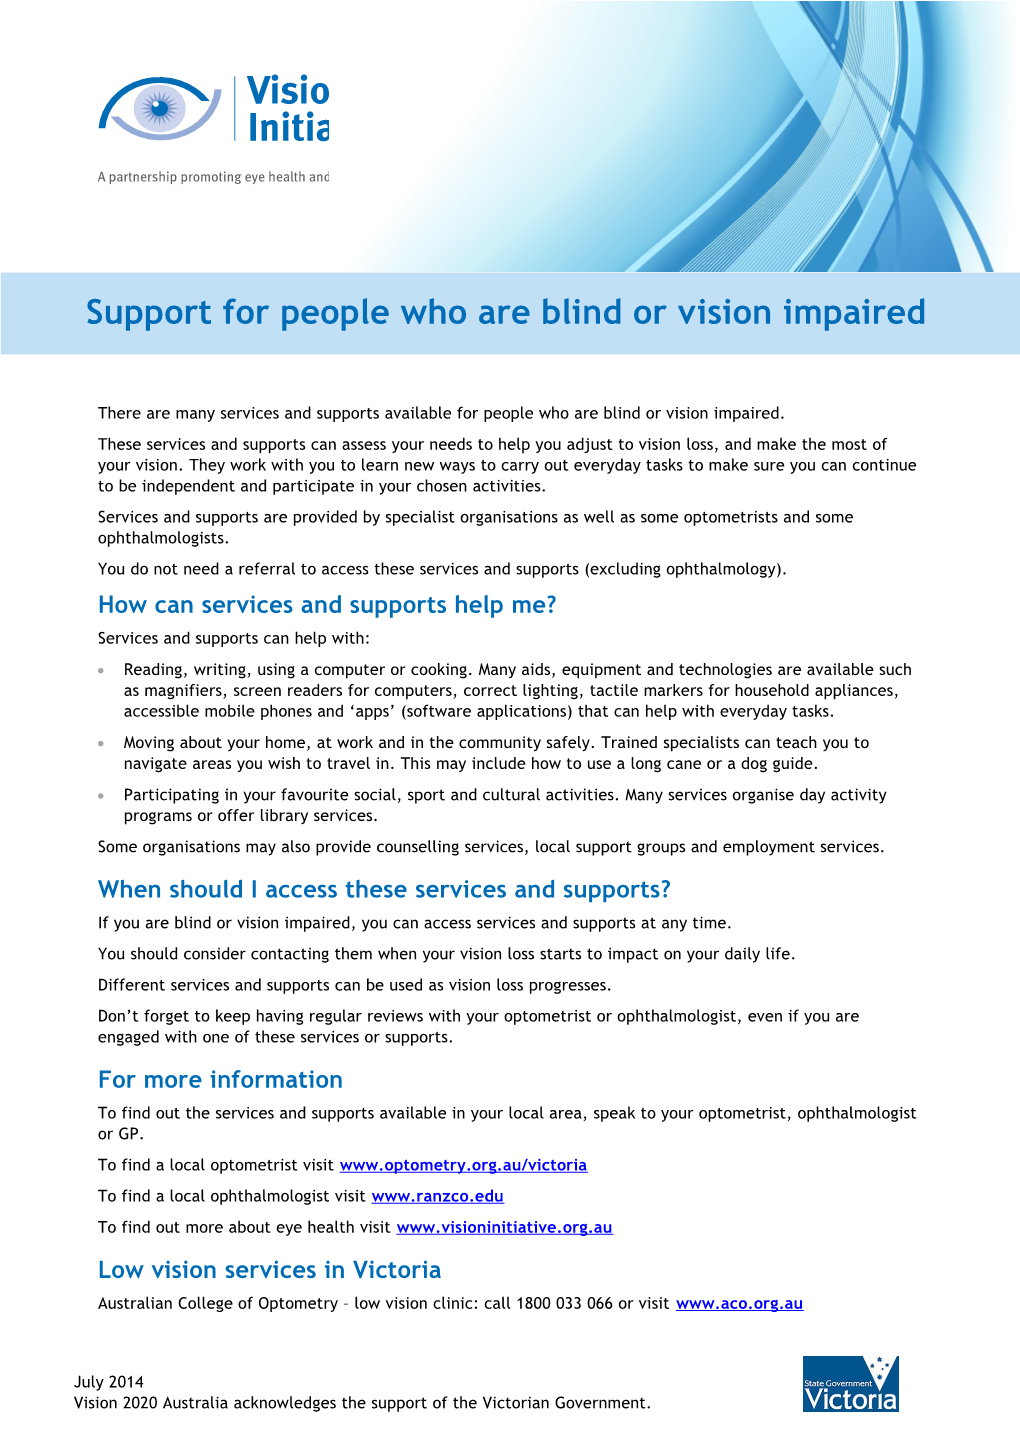 Support for People Who Are Blind Or Vision Impaired